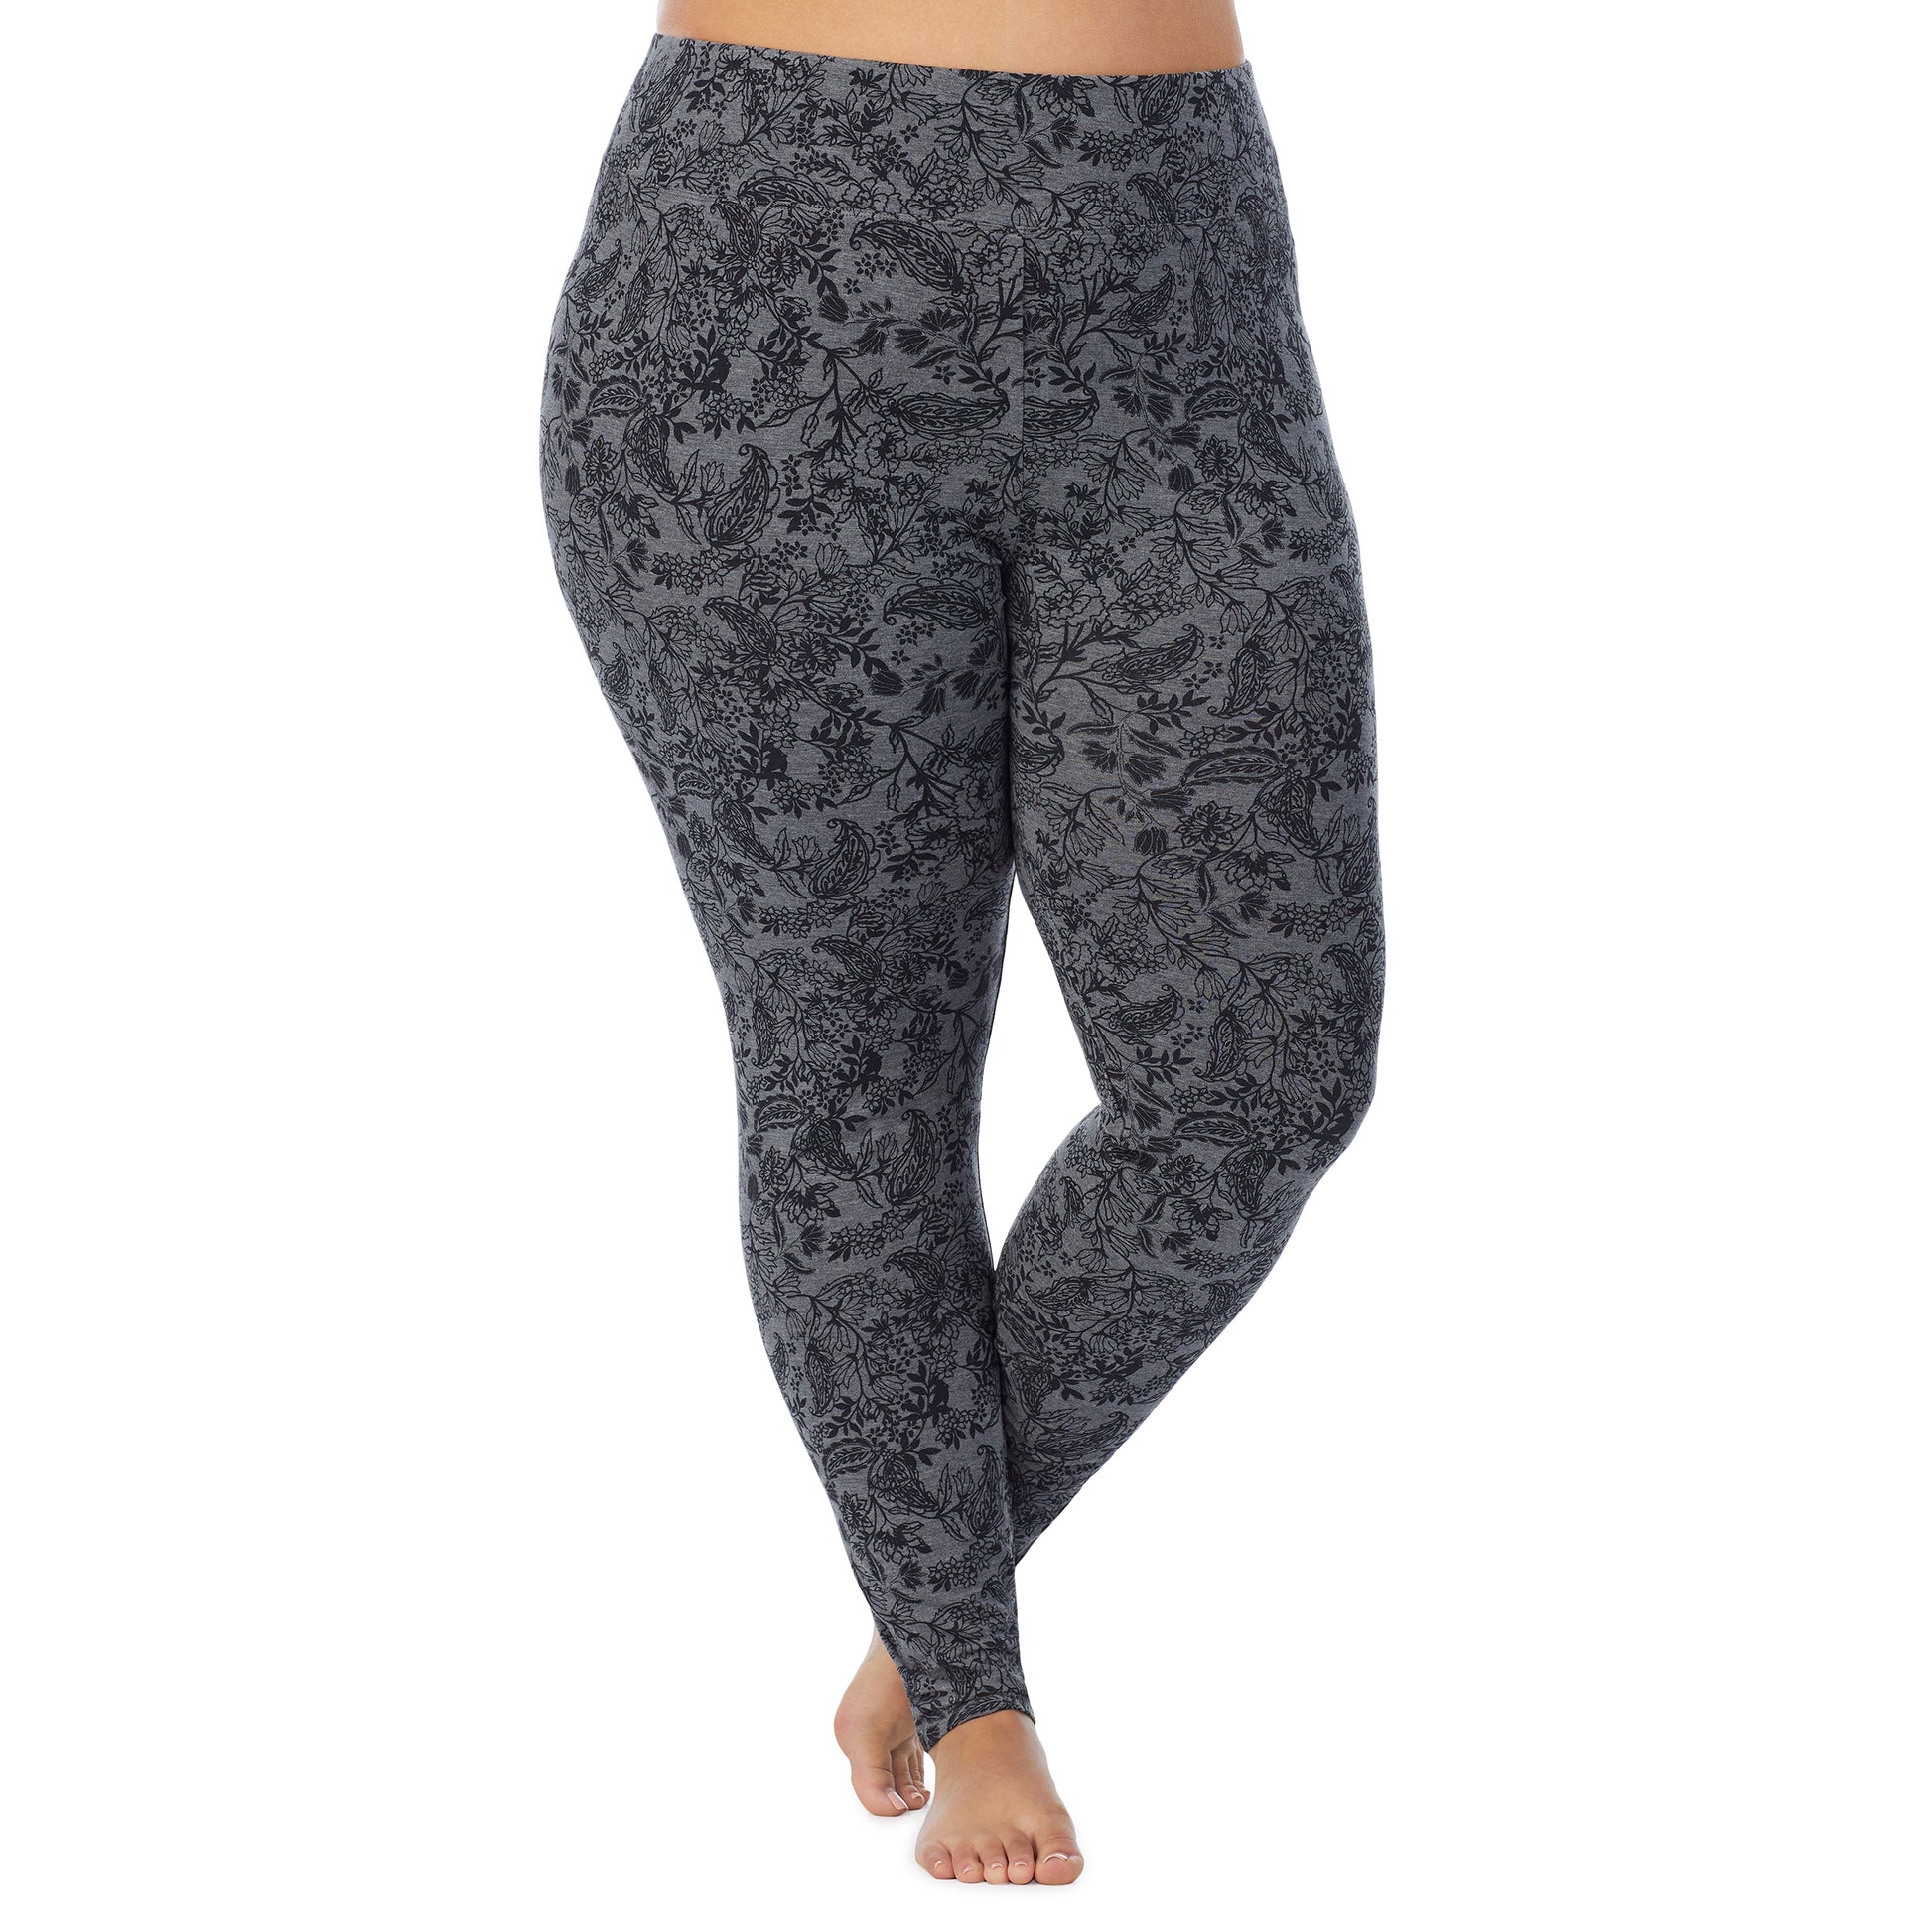  Heather Grey Paisley; Model is wearing size 1X. She is 5'9", Bust 38", Waist 36", Hips 48.5". @A lady wearing a heather grey paisley high waist legging plus.